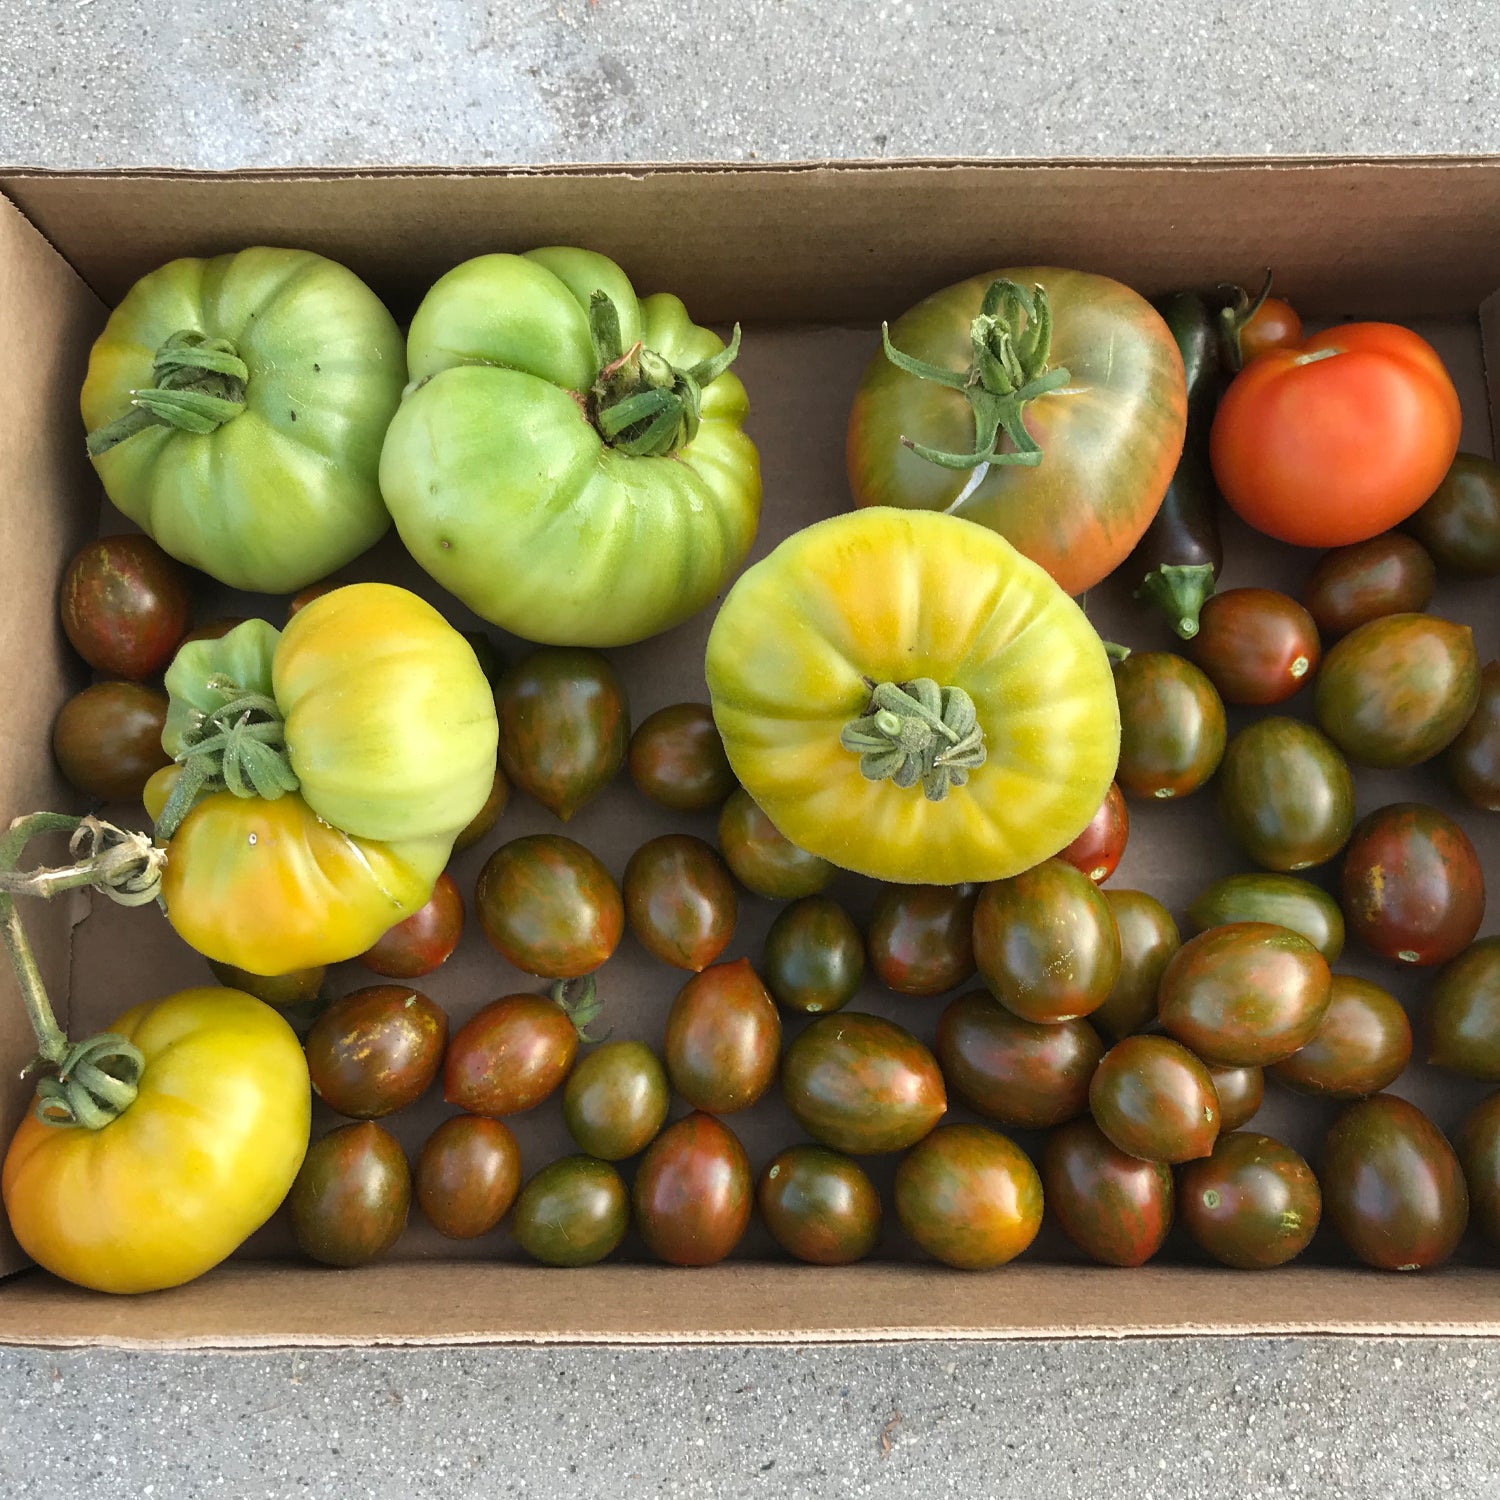 The Quest for the Perfect Tomato